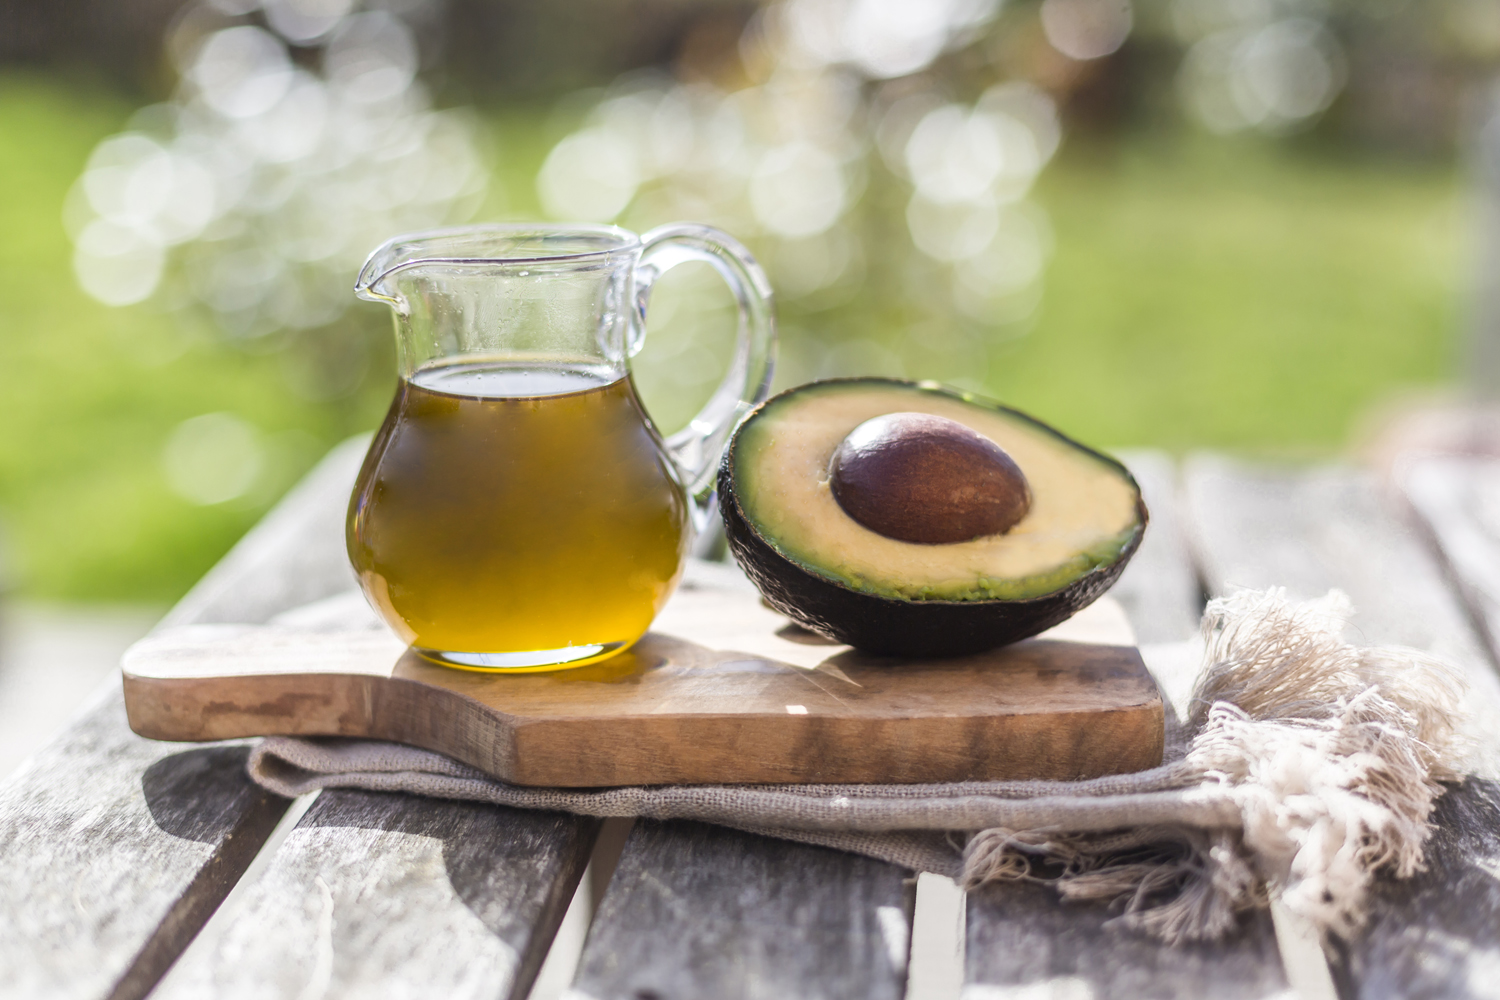 A pitcher of avocado oil beside a sliced avocado on a wooden board